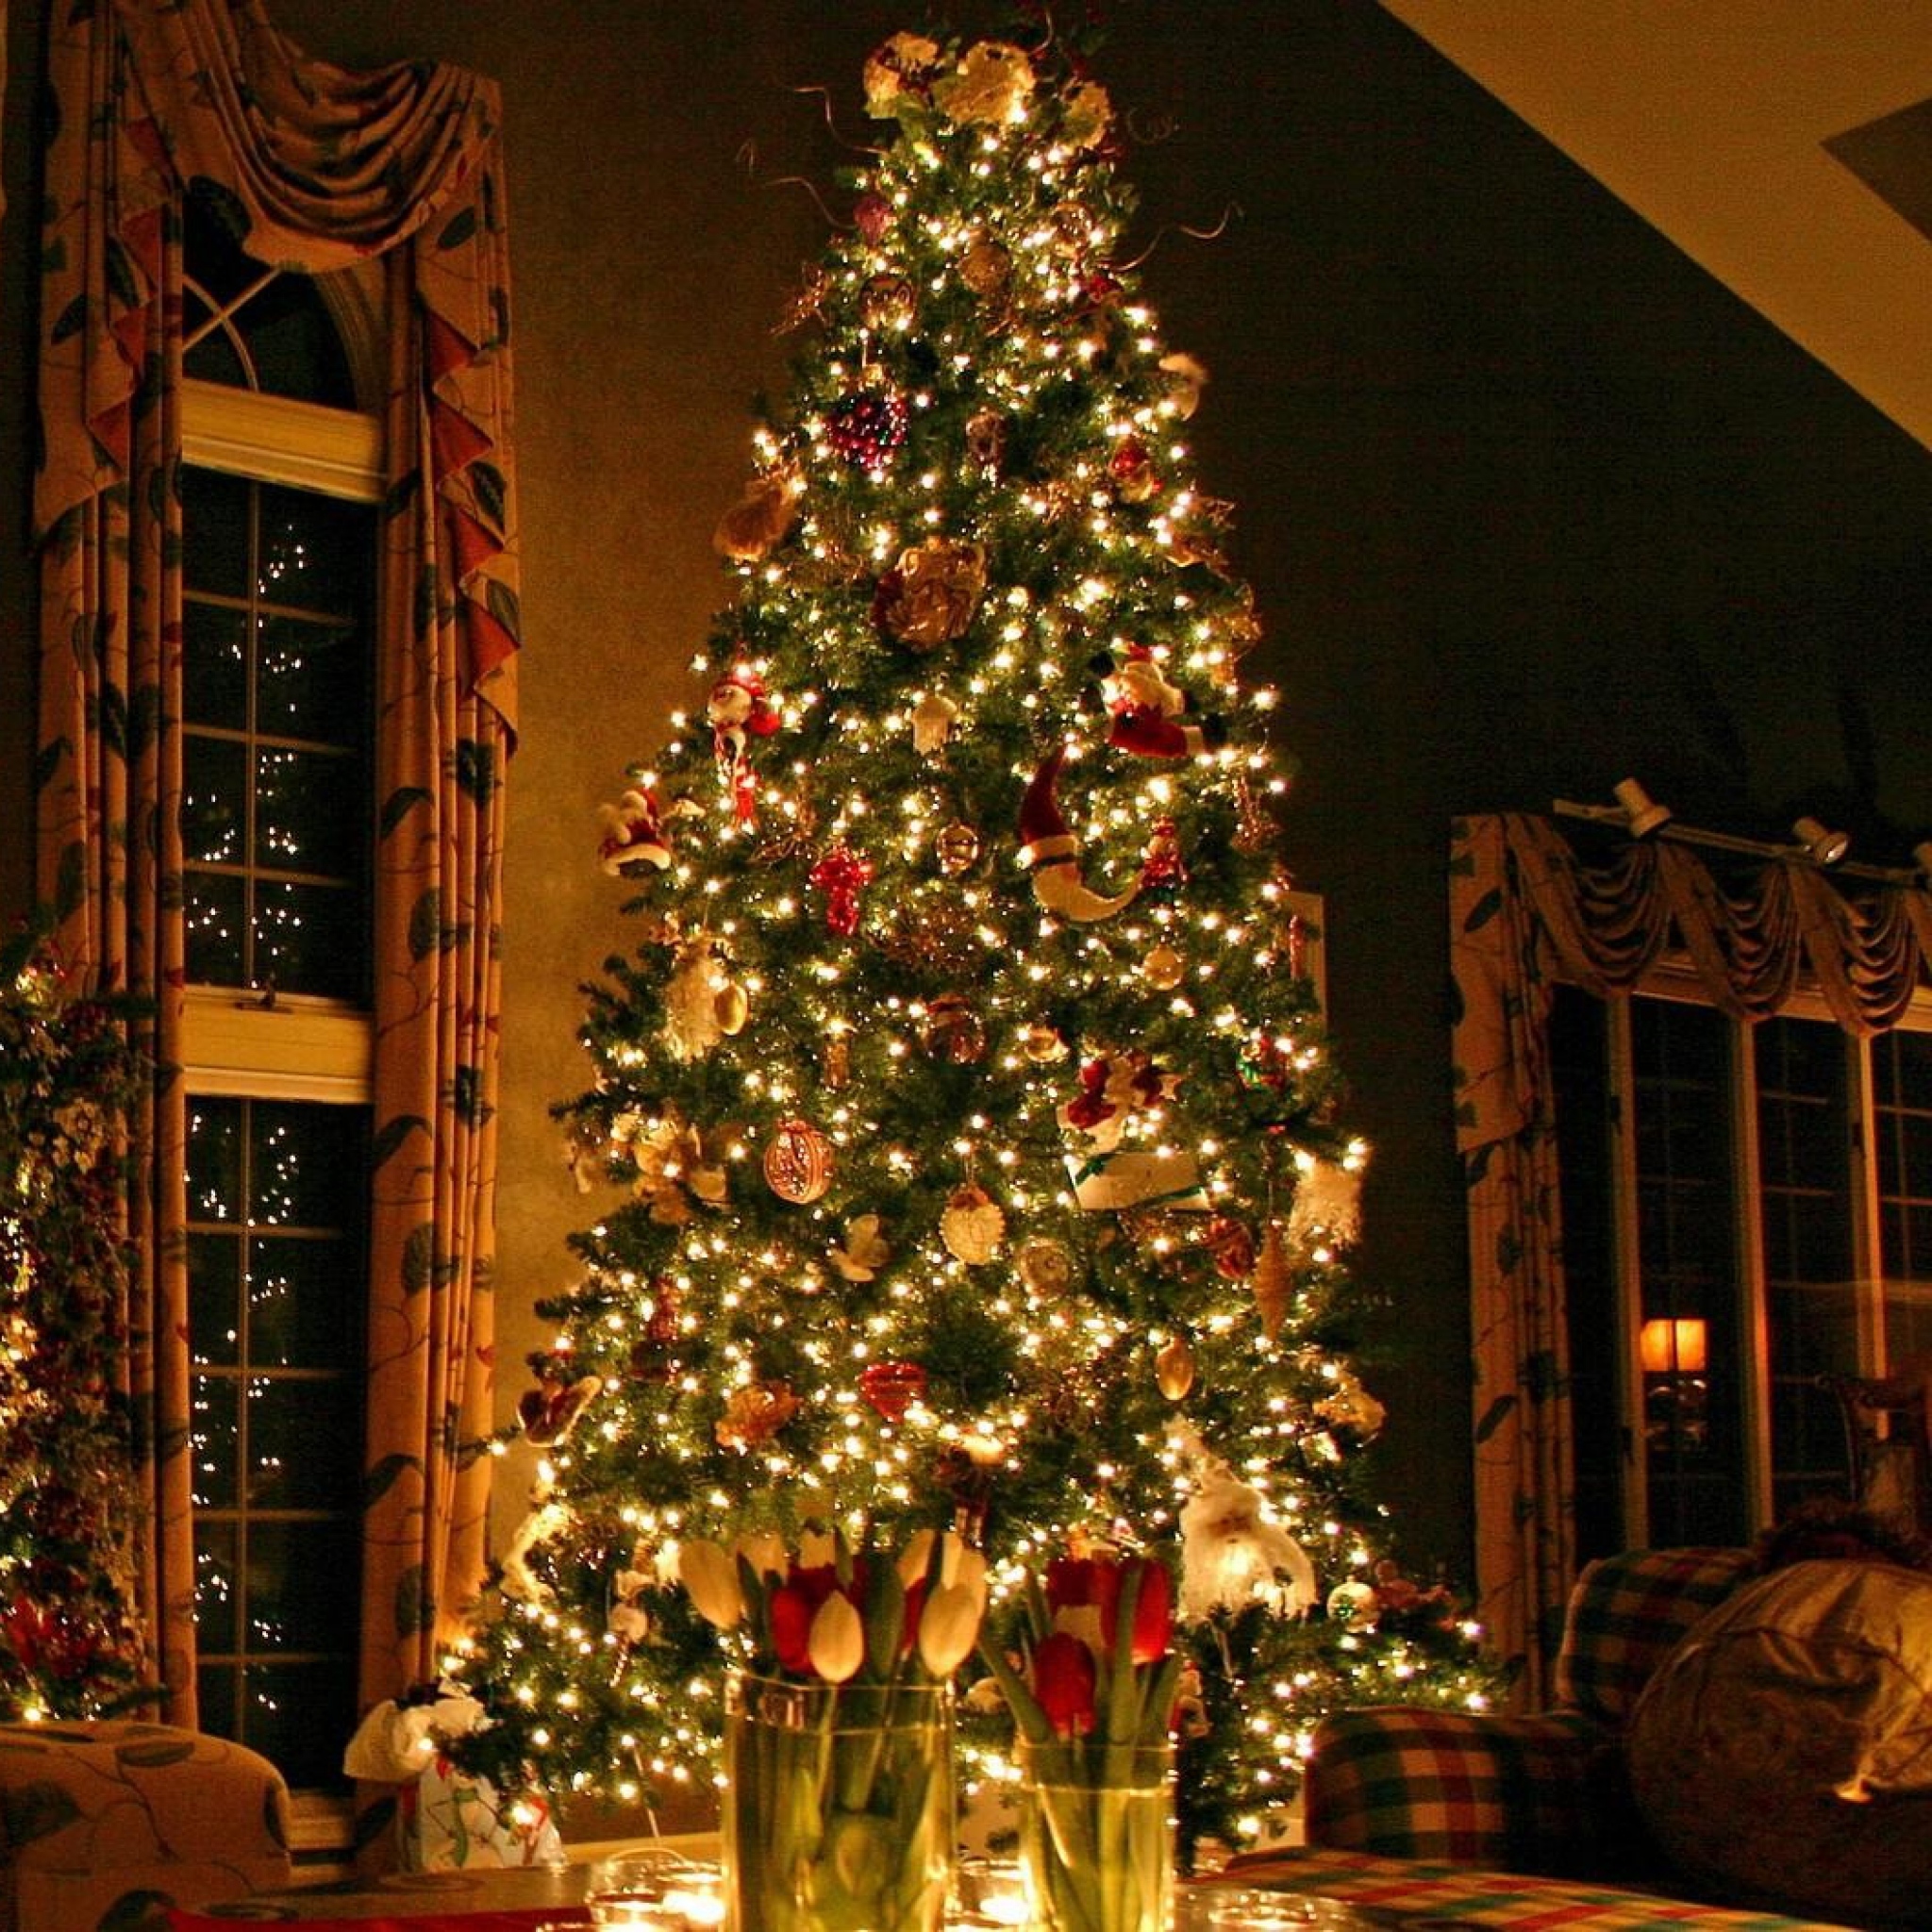 wallpaper: Flowers, Christmas tree, Ornaments, Fireplace ...